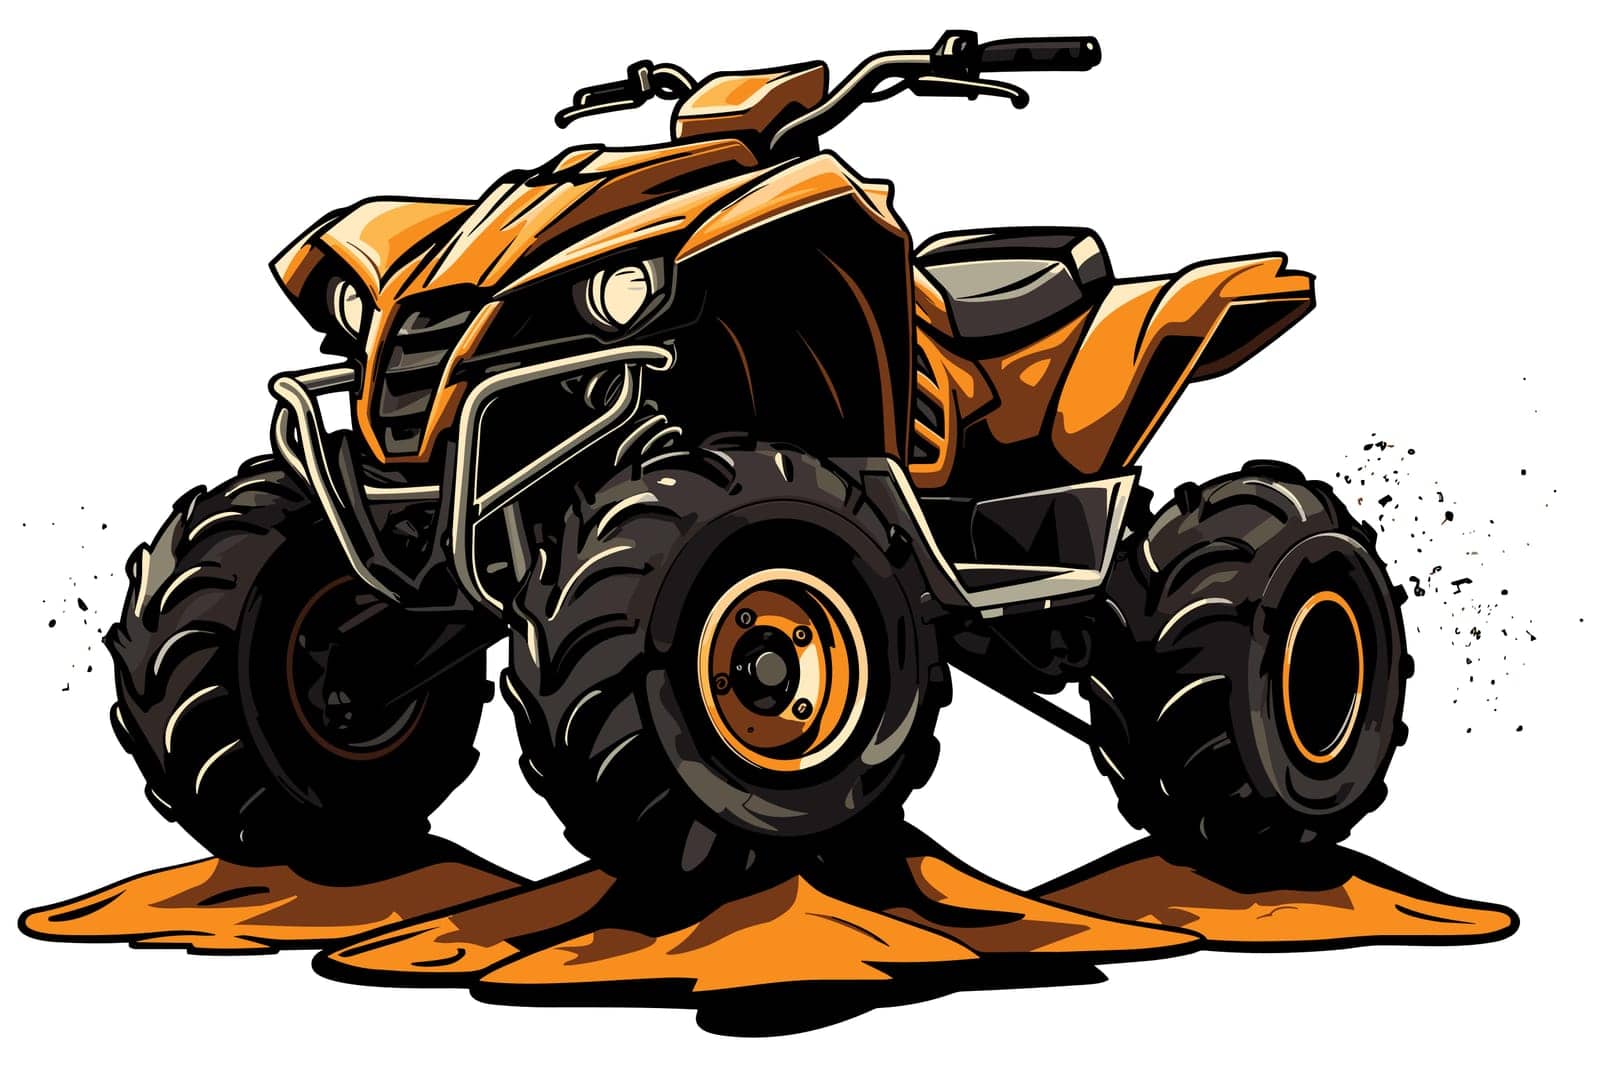 ATV on Sand Isolated by Malchev